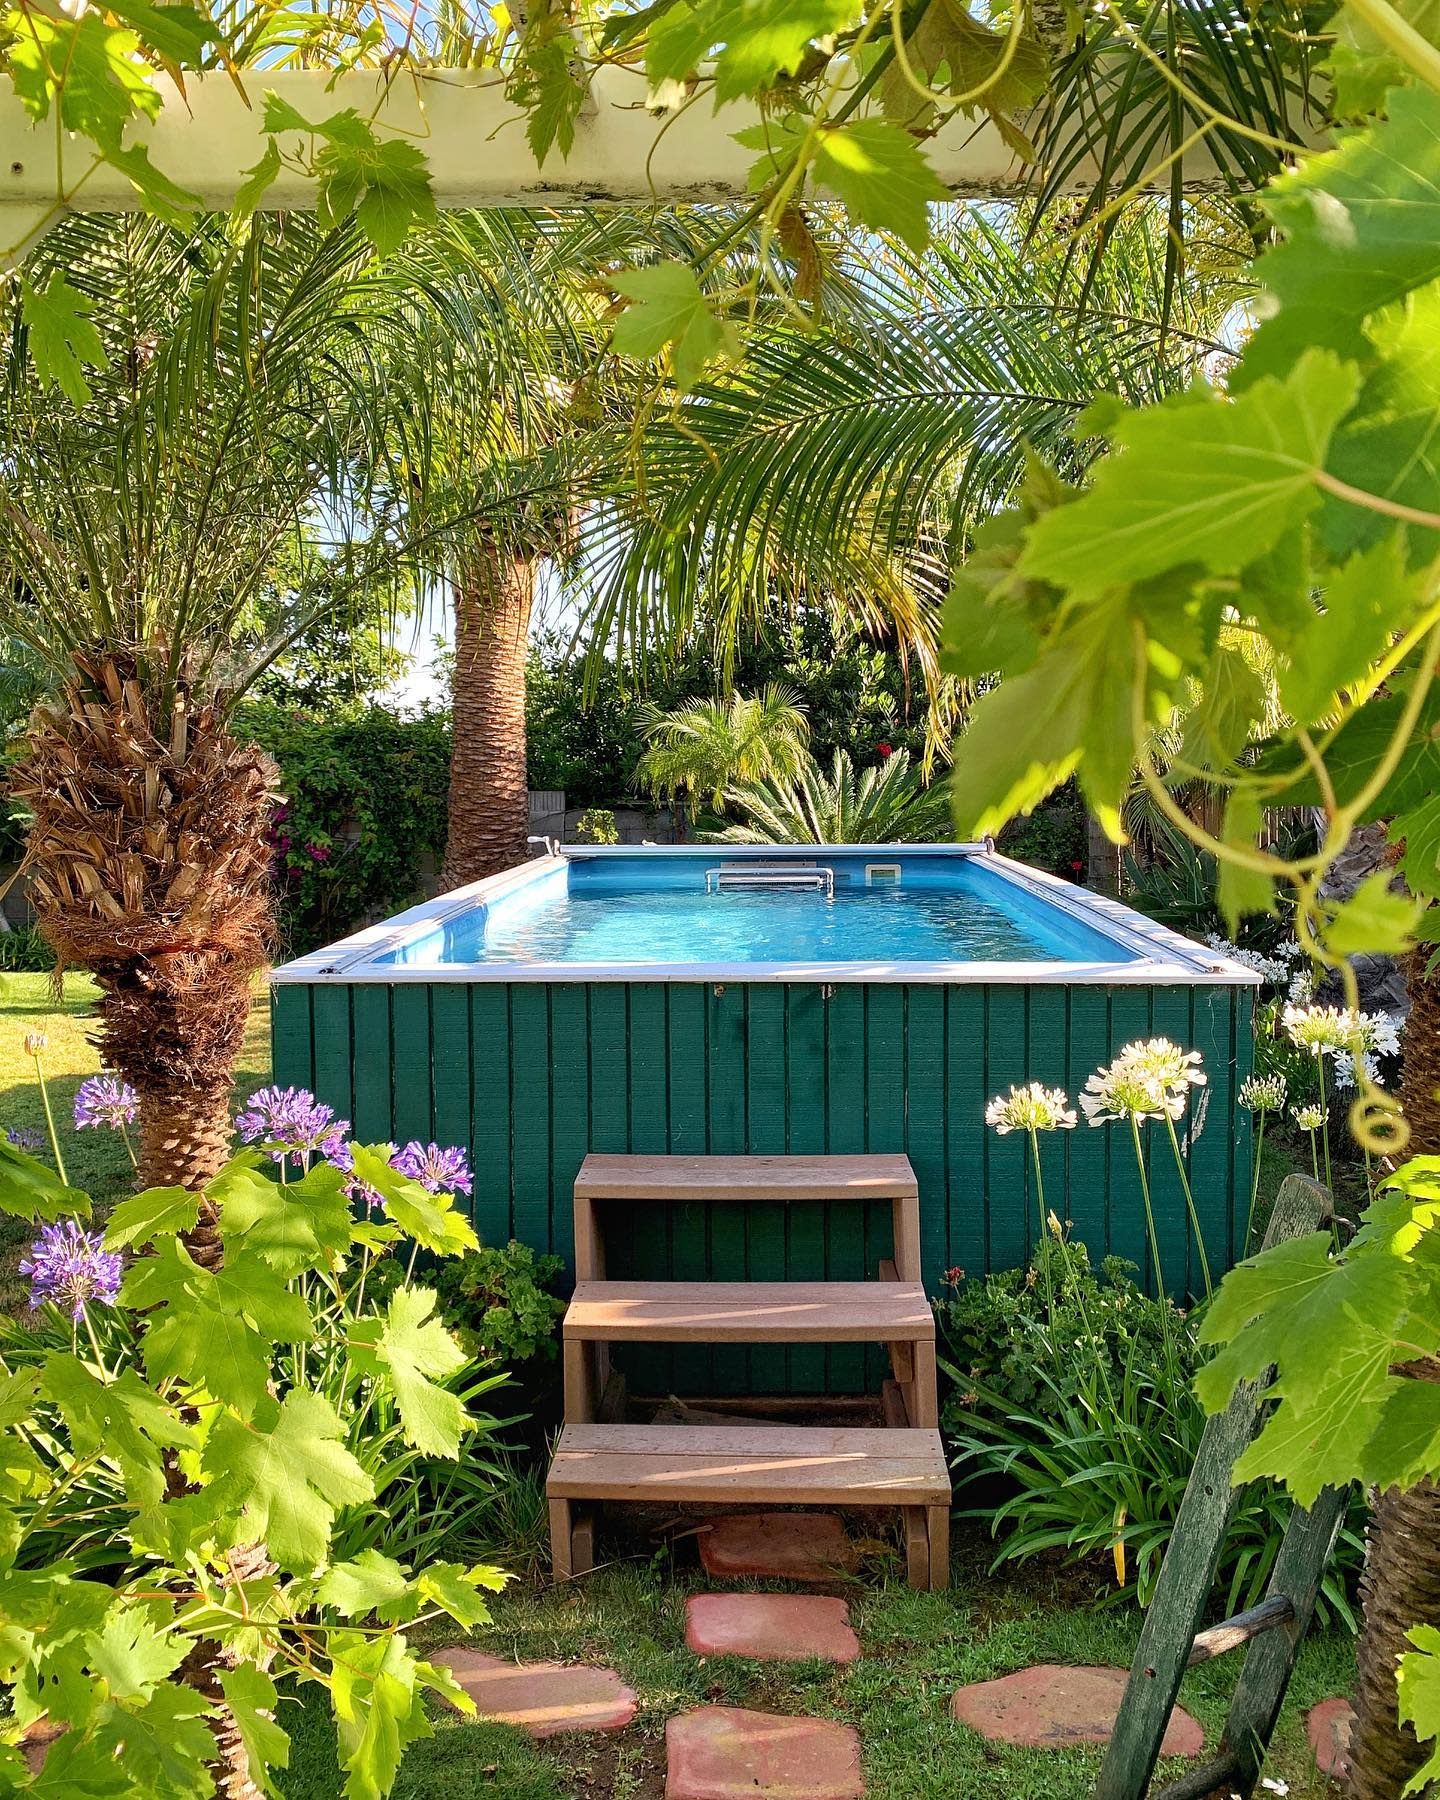 Landscaping Ideas Around Above Ground Pool: Food for Thought